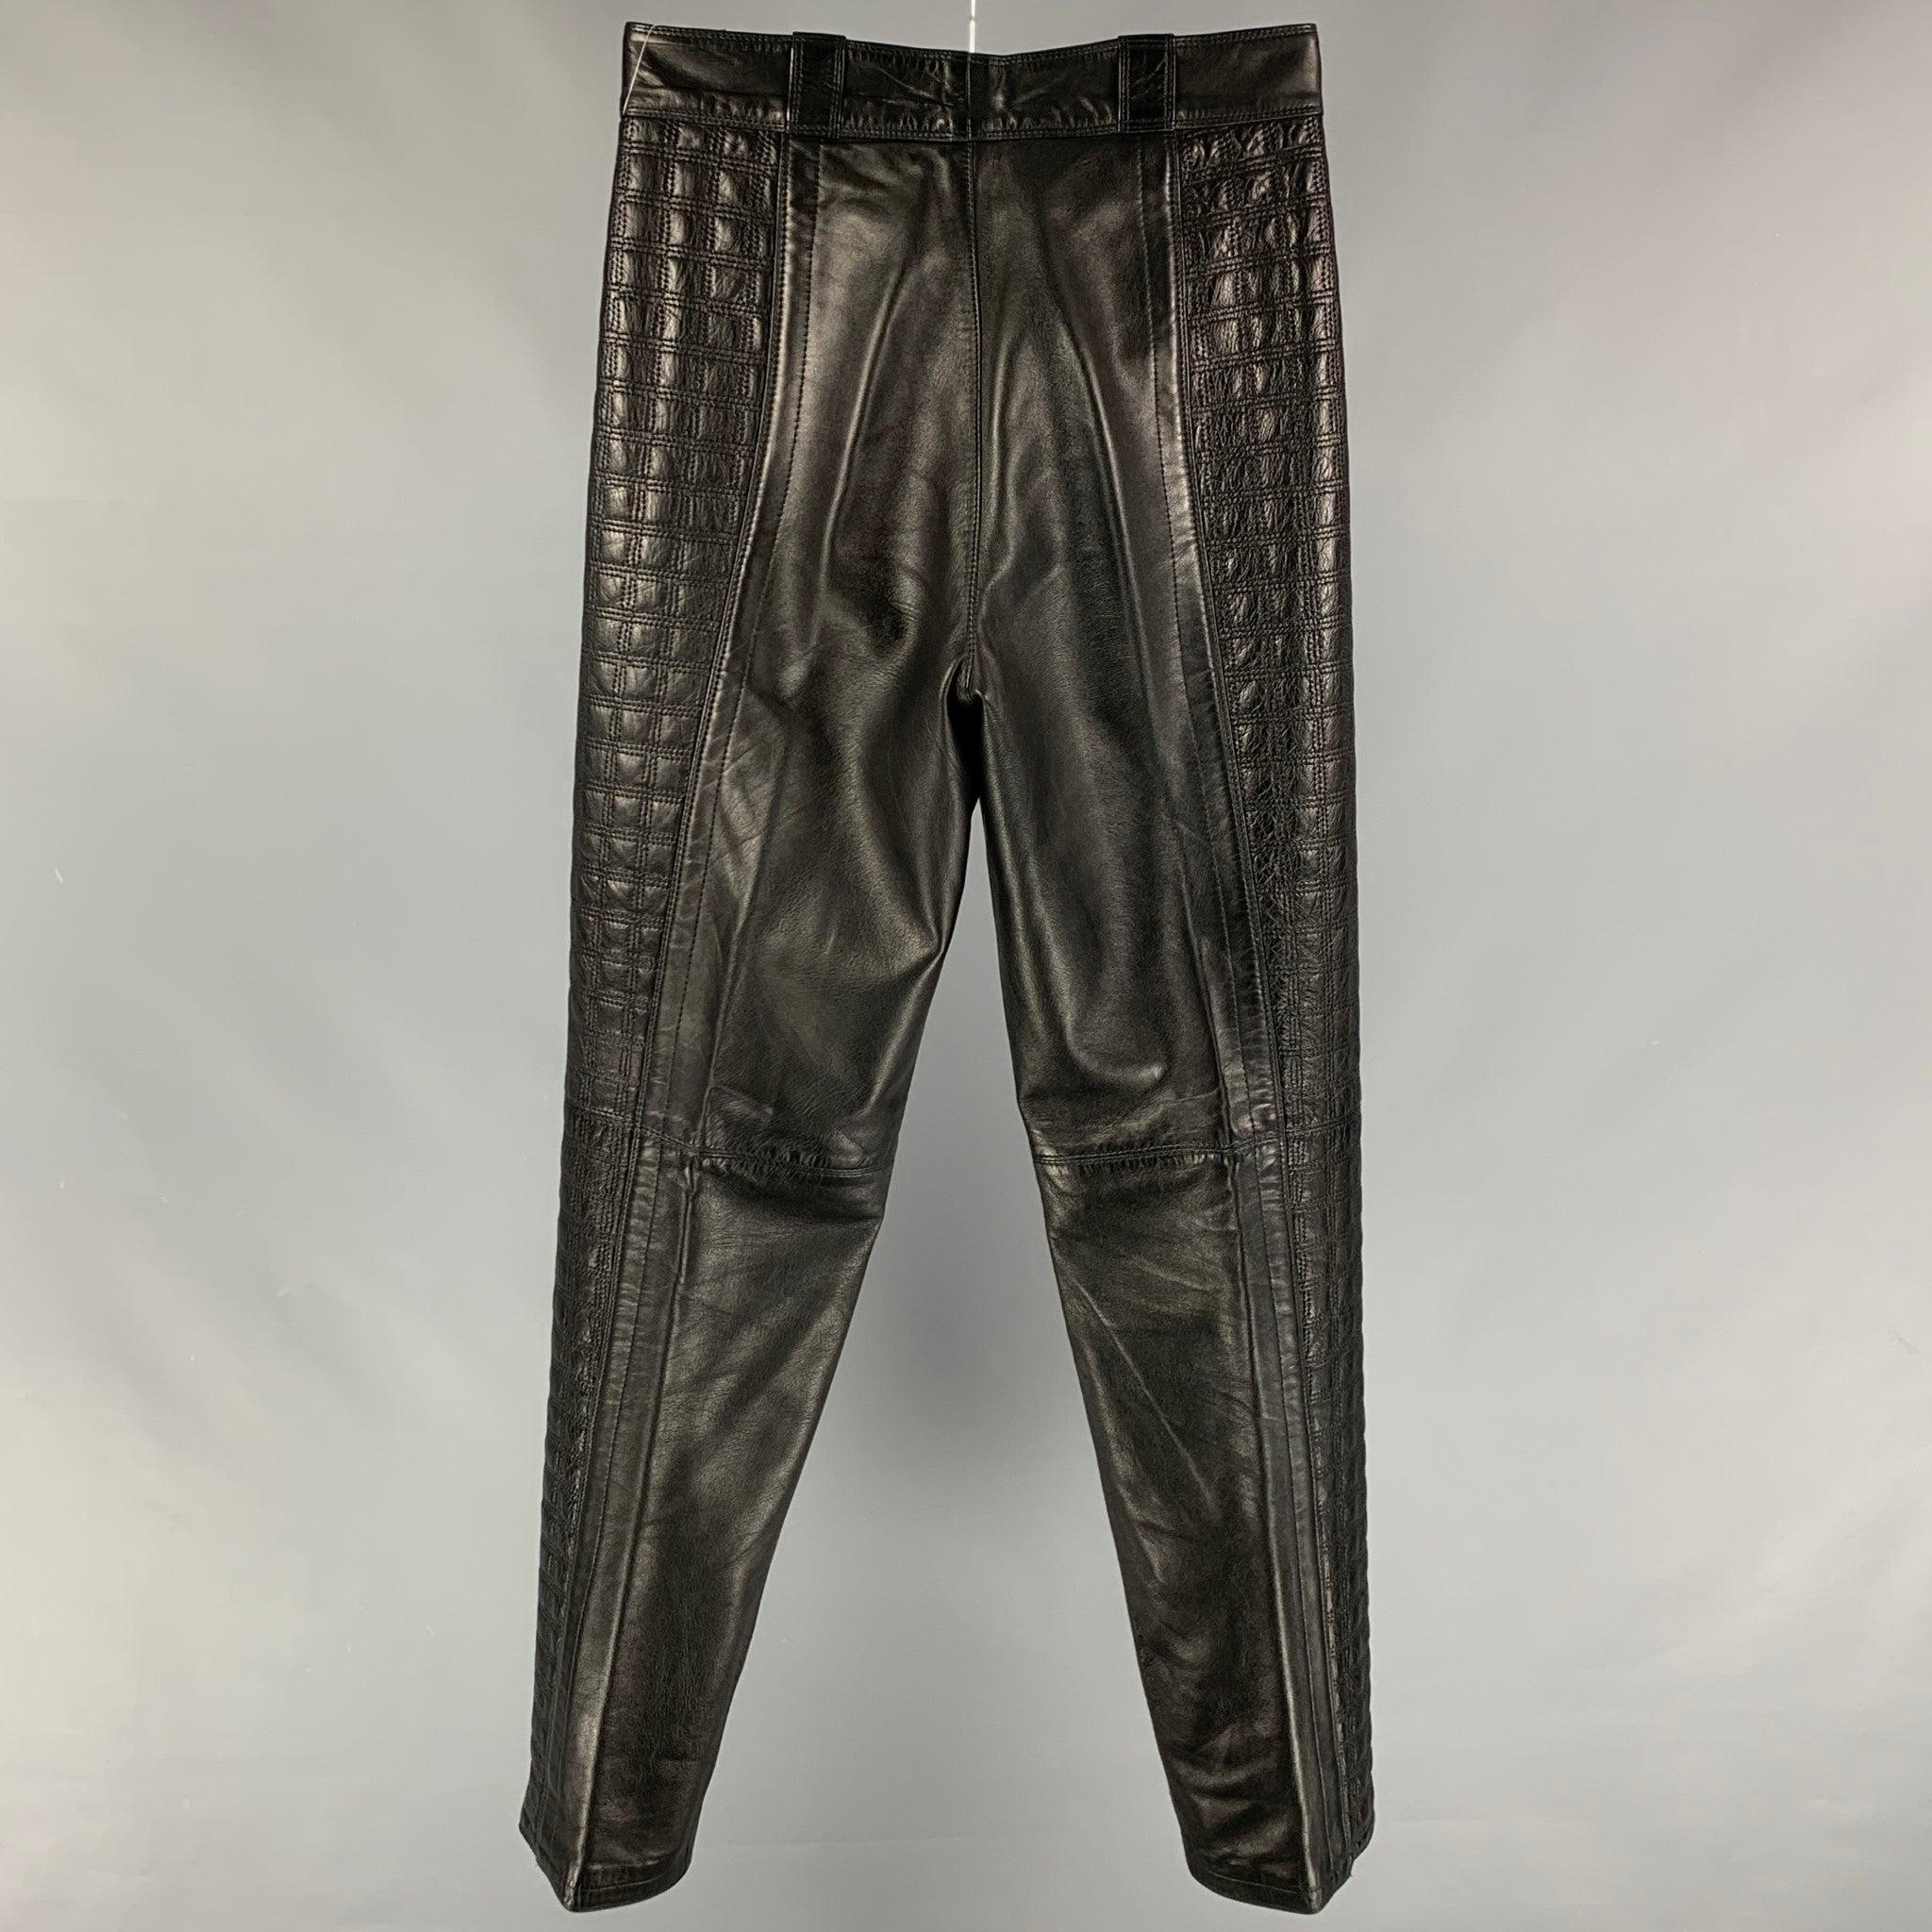 GIANNI VERSACE casual pants comes in a black quilted leather featuring top stitching, pleated front, slit pockets, and a zip fly closure.
Very Good
Pre-Owned Condition. Fabric tag removed.  

Marked:   Size tag removed.  

Measurements: 
  Waist: 29